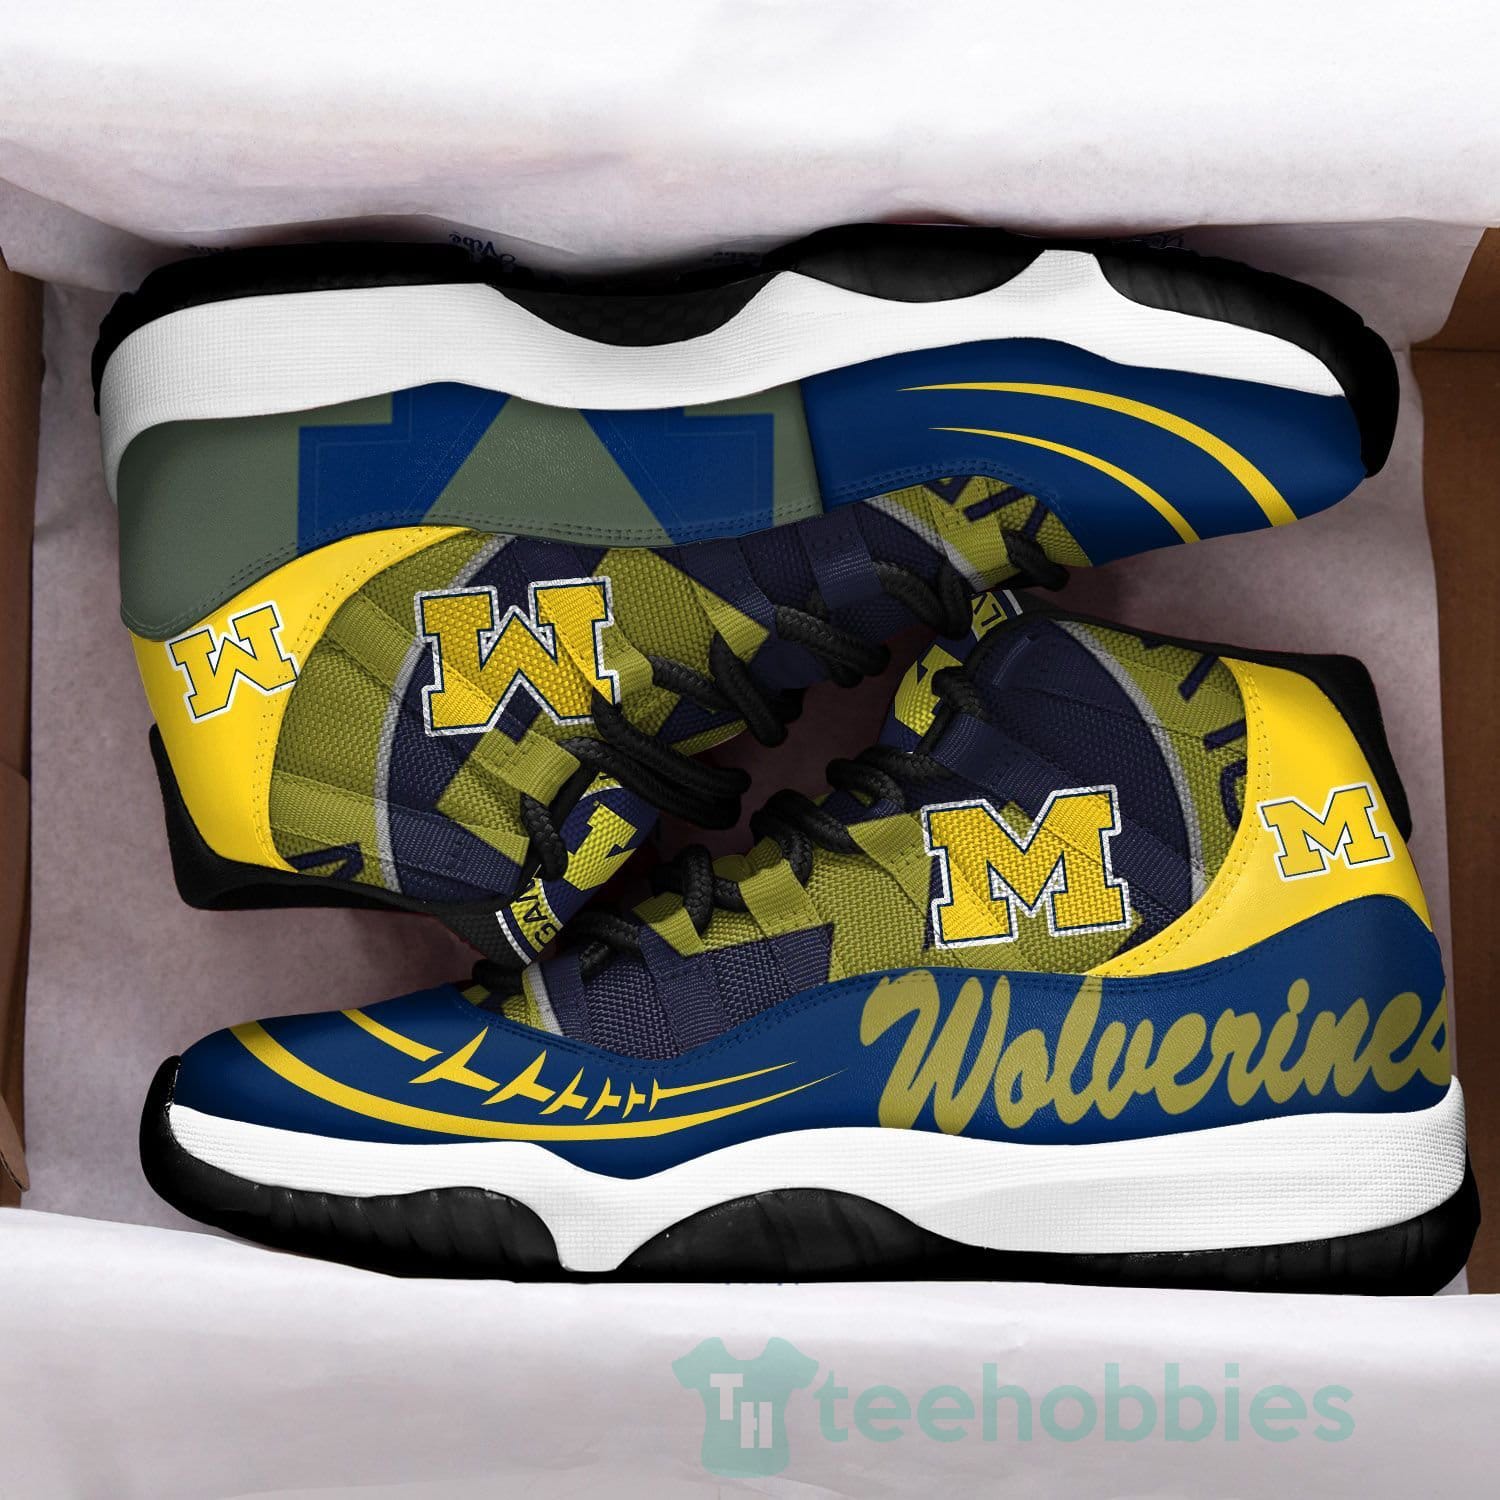 Michigan Wolverines New Air Jordan 11 Shoes Fans Product photo 2